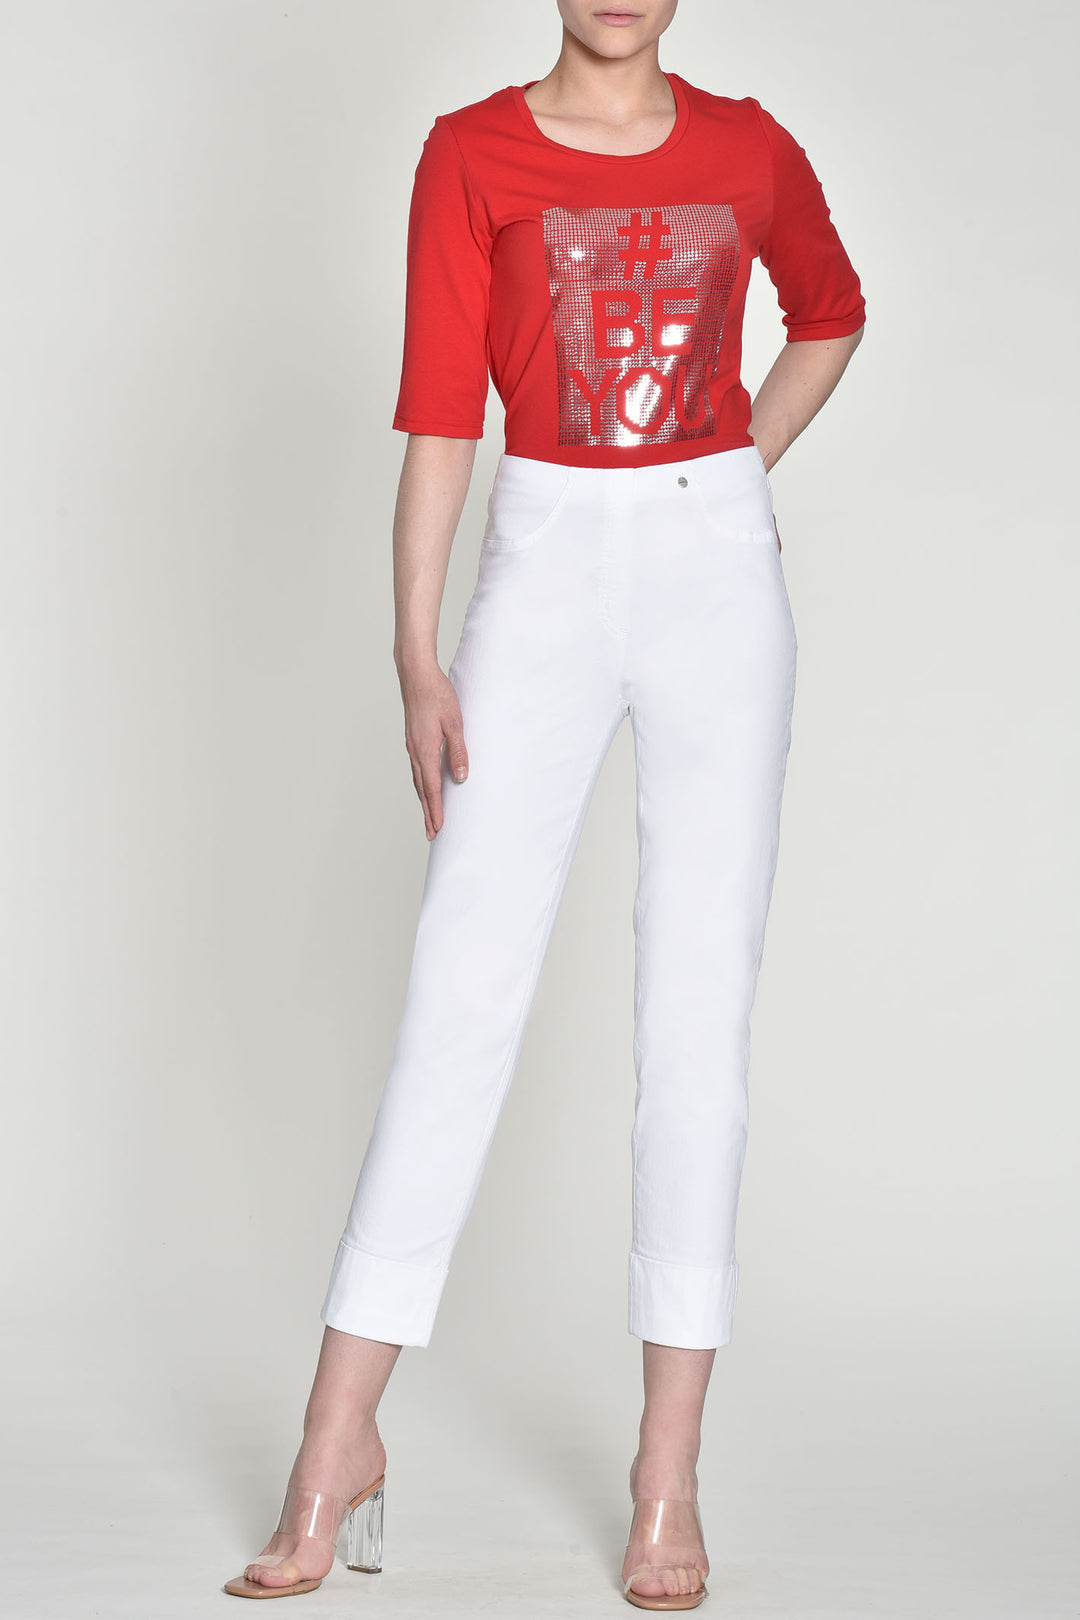 Robell 51628 5448 10 Bella 09 White Trousers 68cm - Experience Boutique